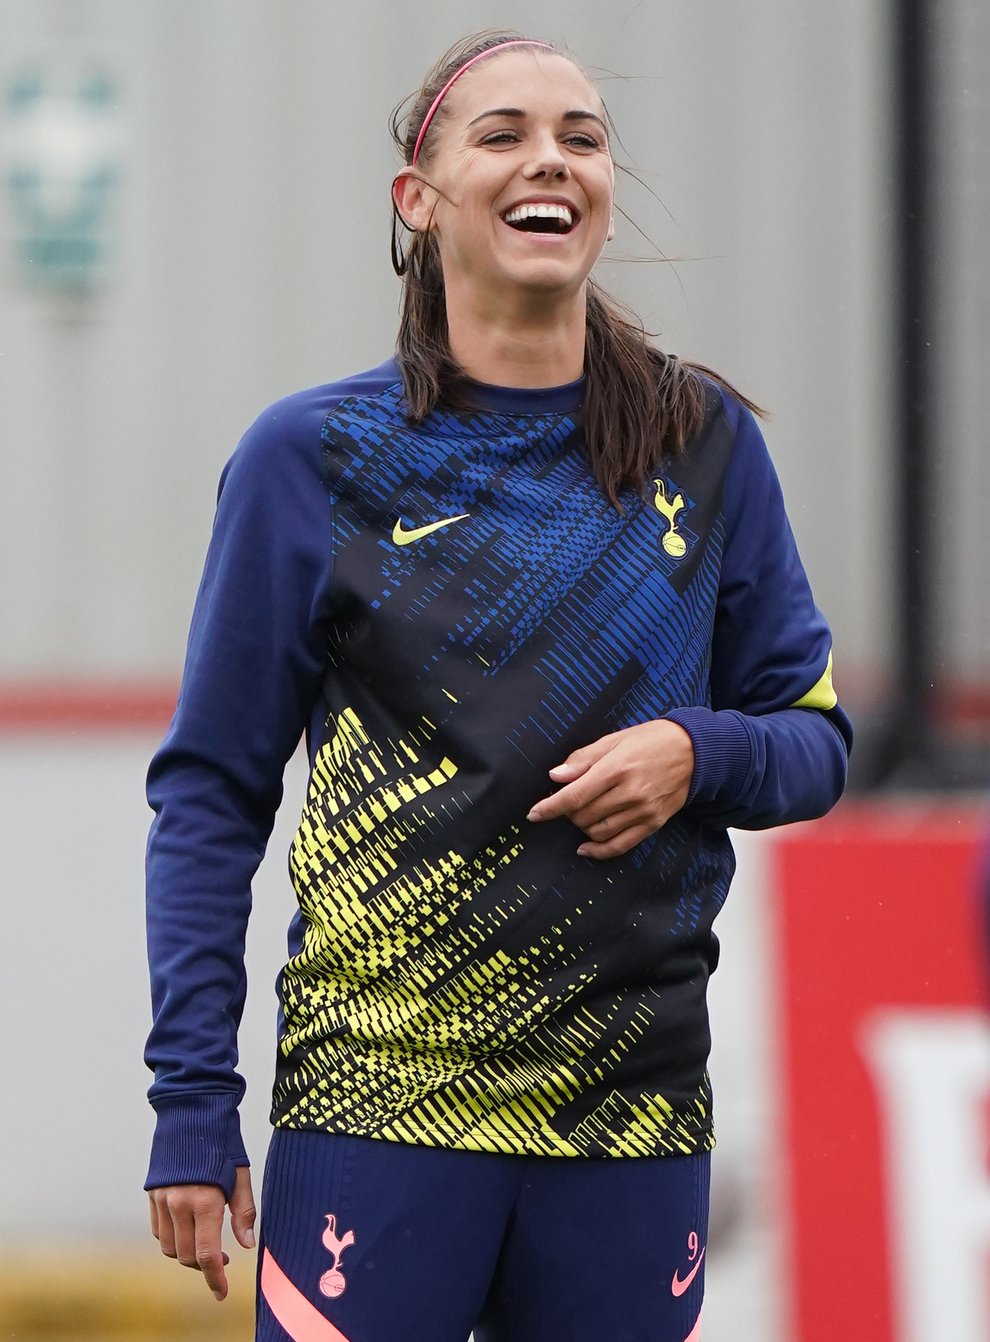 Morgan is yet to make her debut for Spurs